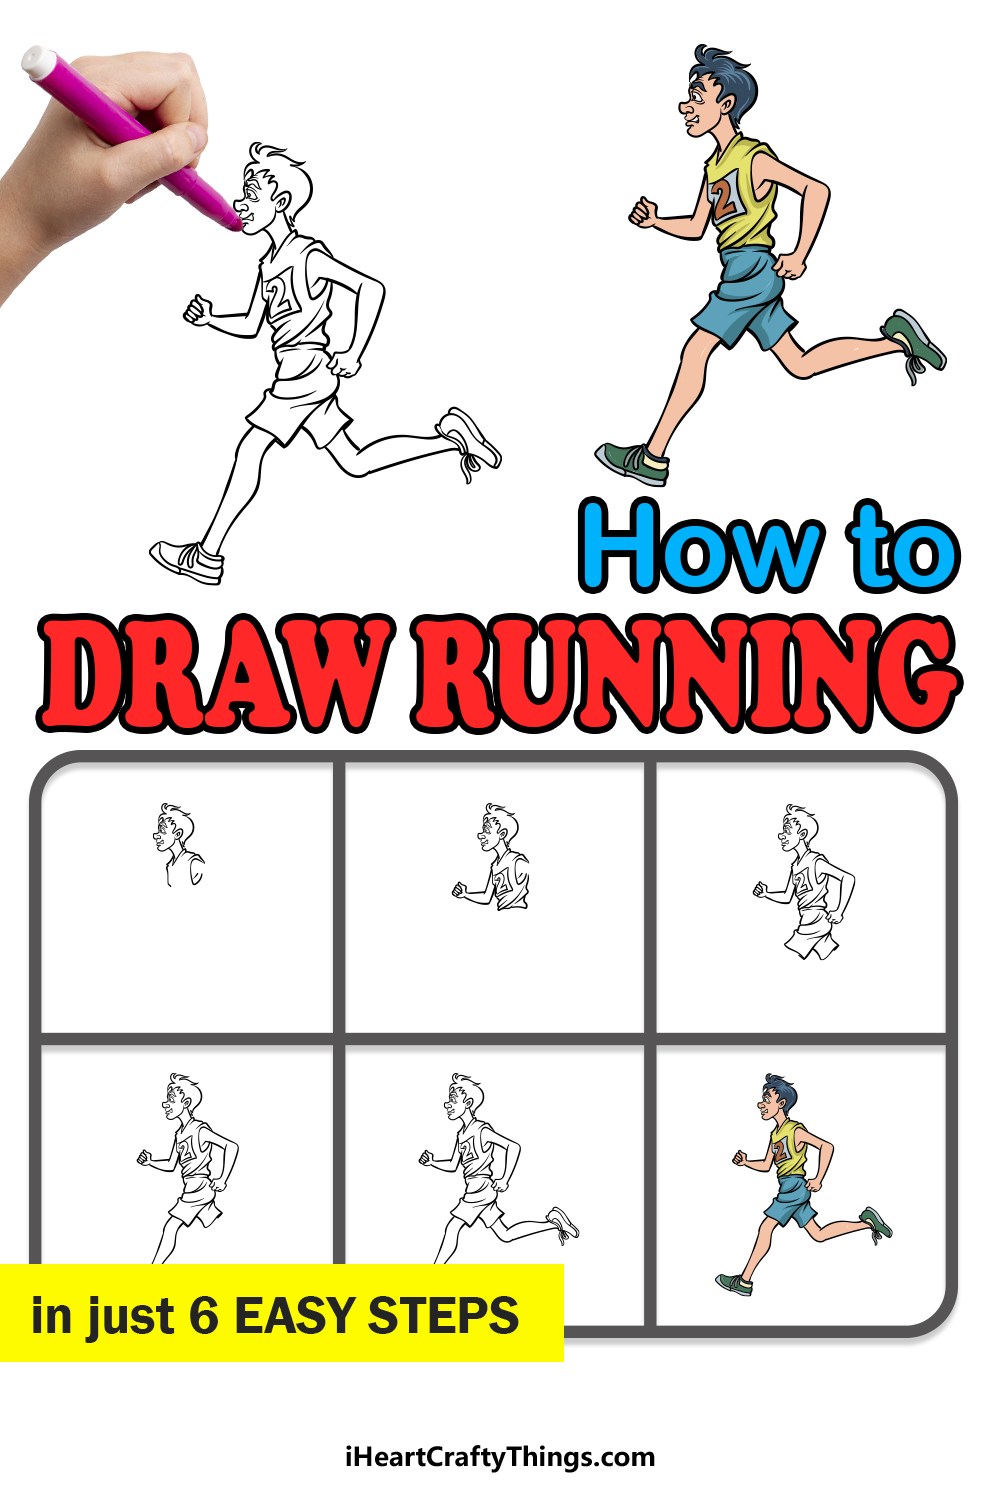 how to draw Running in 6 easy steps